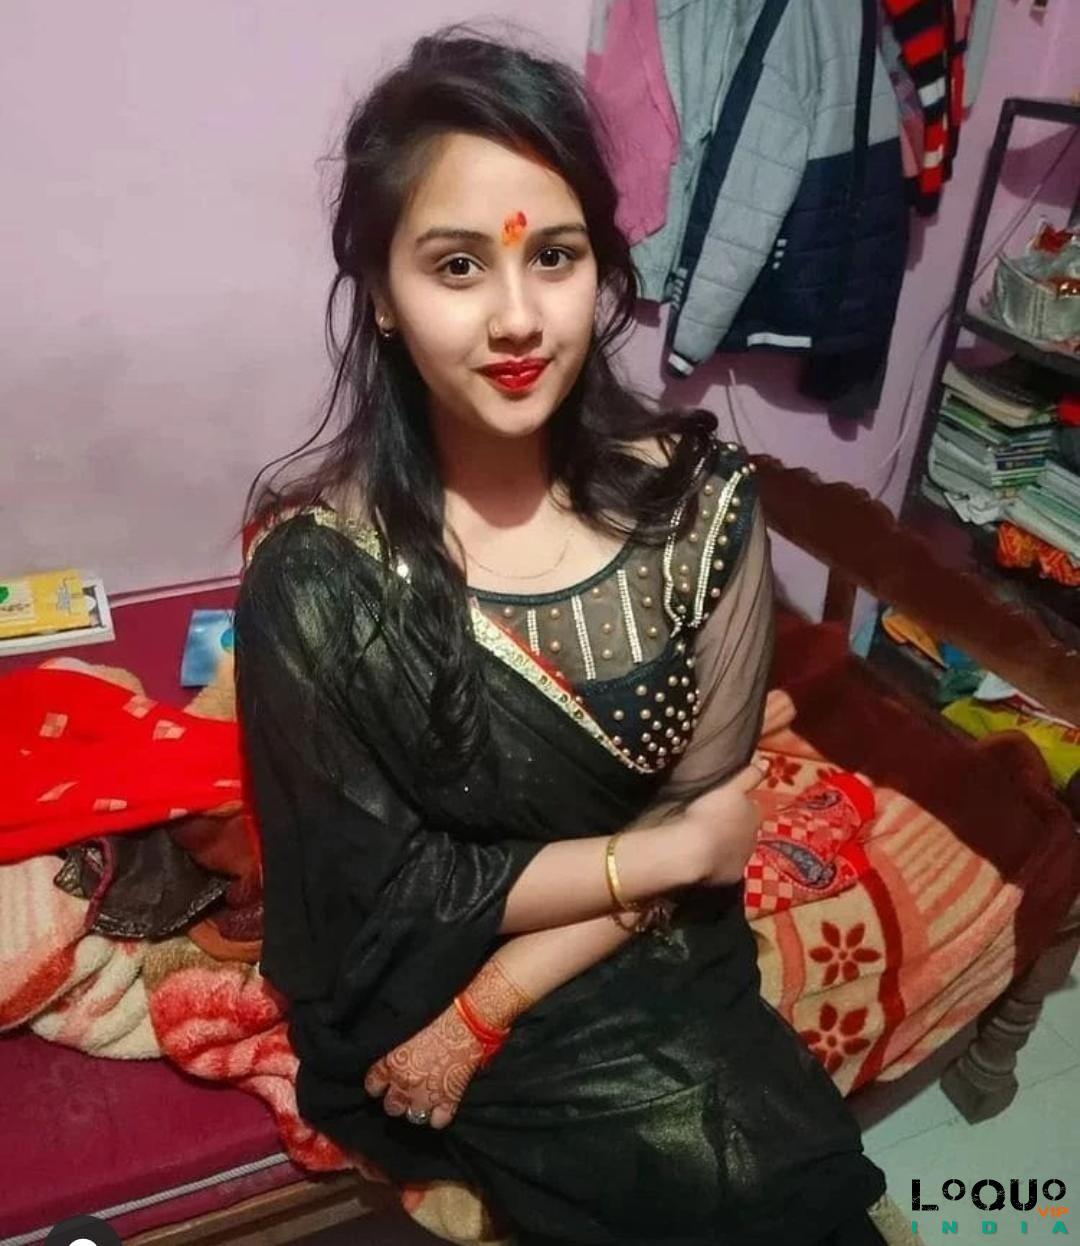 Call Girls Himachal Pradesh: Mandi Low Price Call Gril 80022//12248 Only For Sex And High Profile Best Gril S